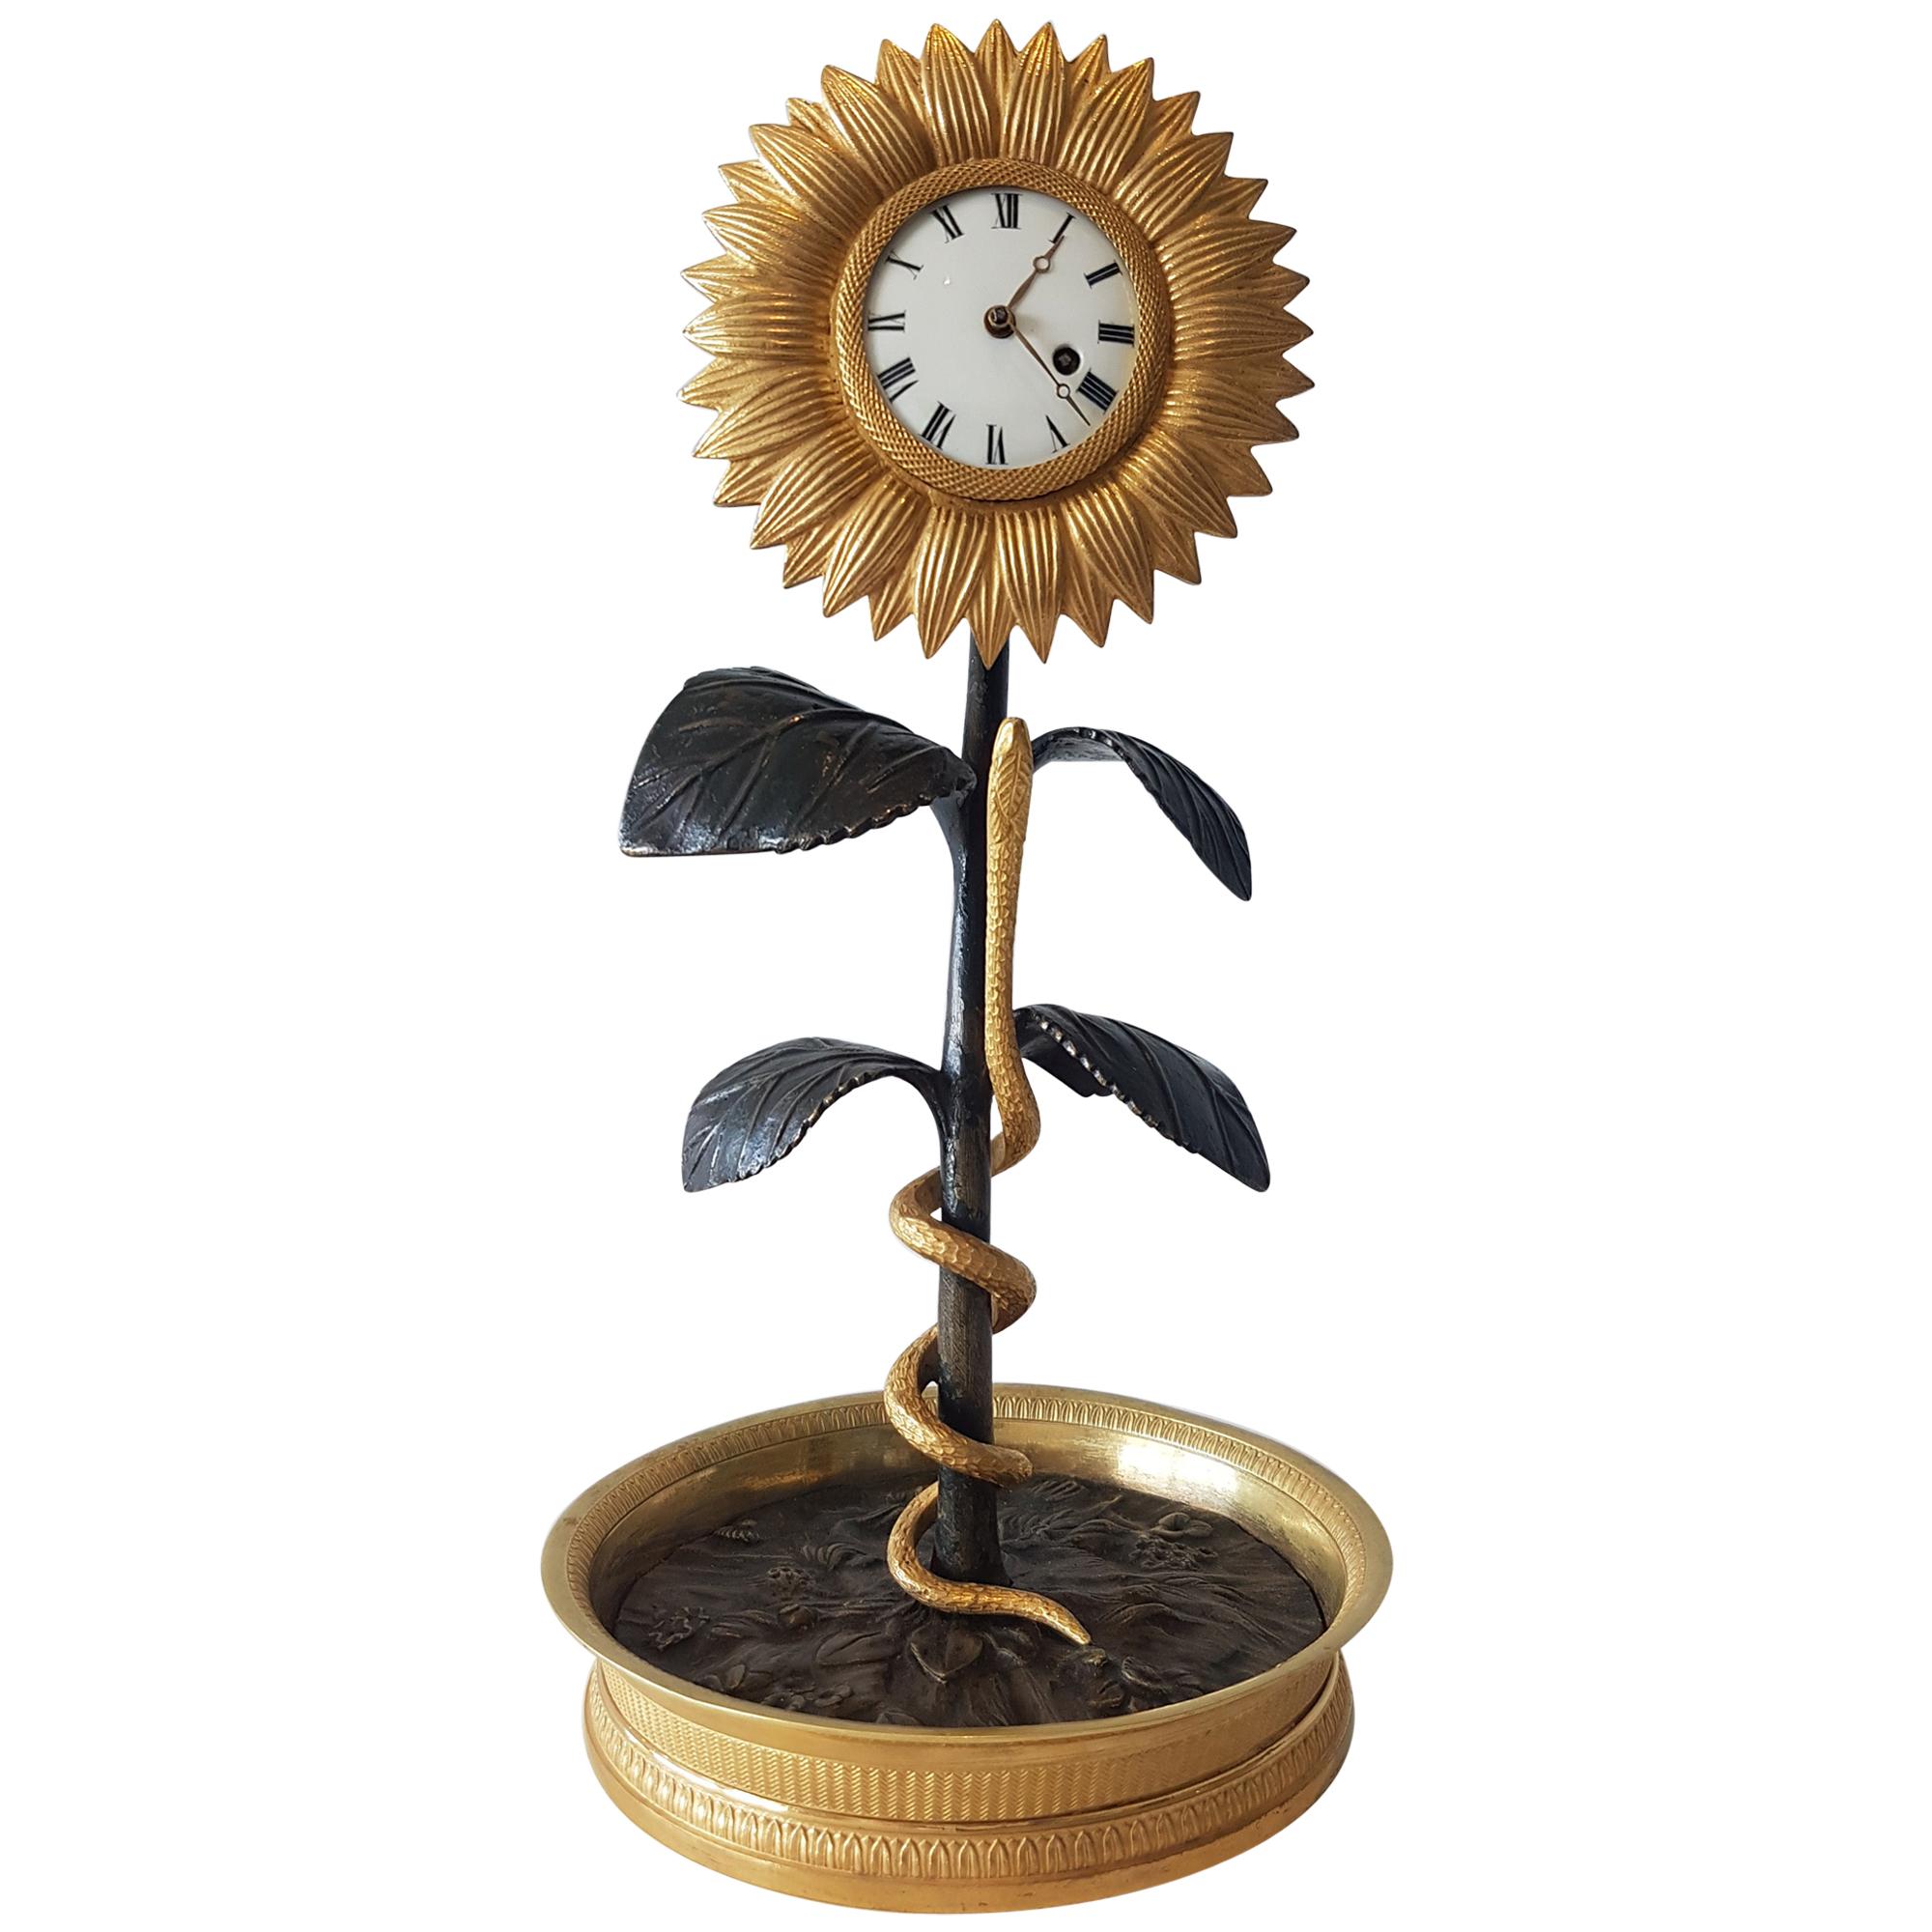 A sublime French Empire sunflower clock in original fire or mercury gilt ormolu and patinated bronze. Wonderful detail in this sweet clock, from the detailed ormolu base, the patinated bronze center showing flowers, to the snake, curling its way up